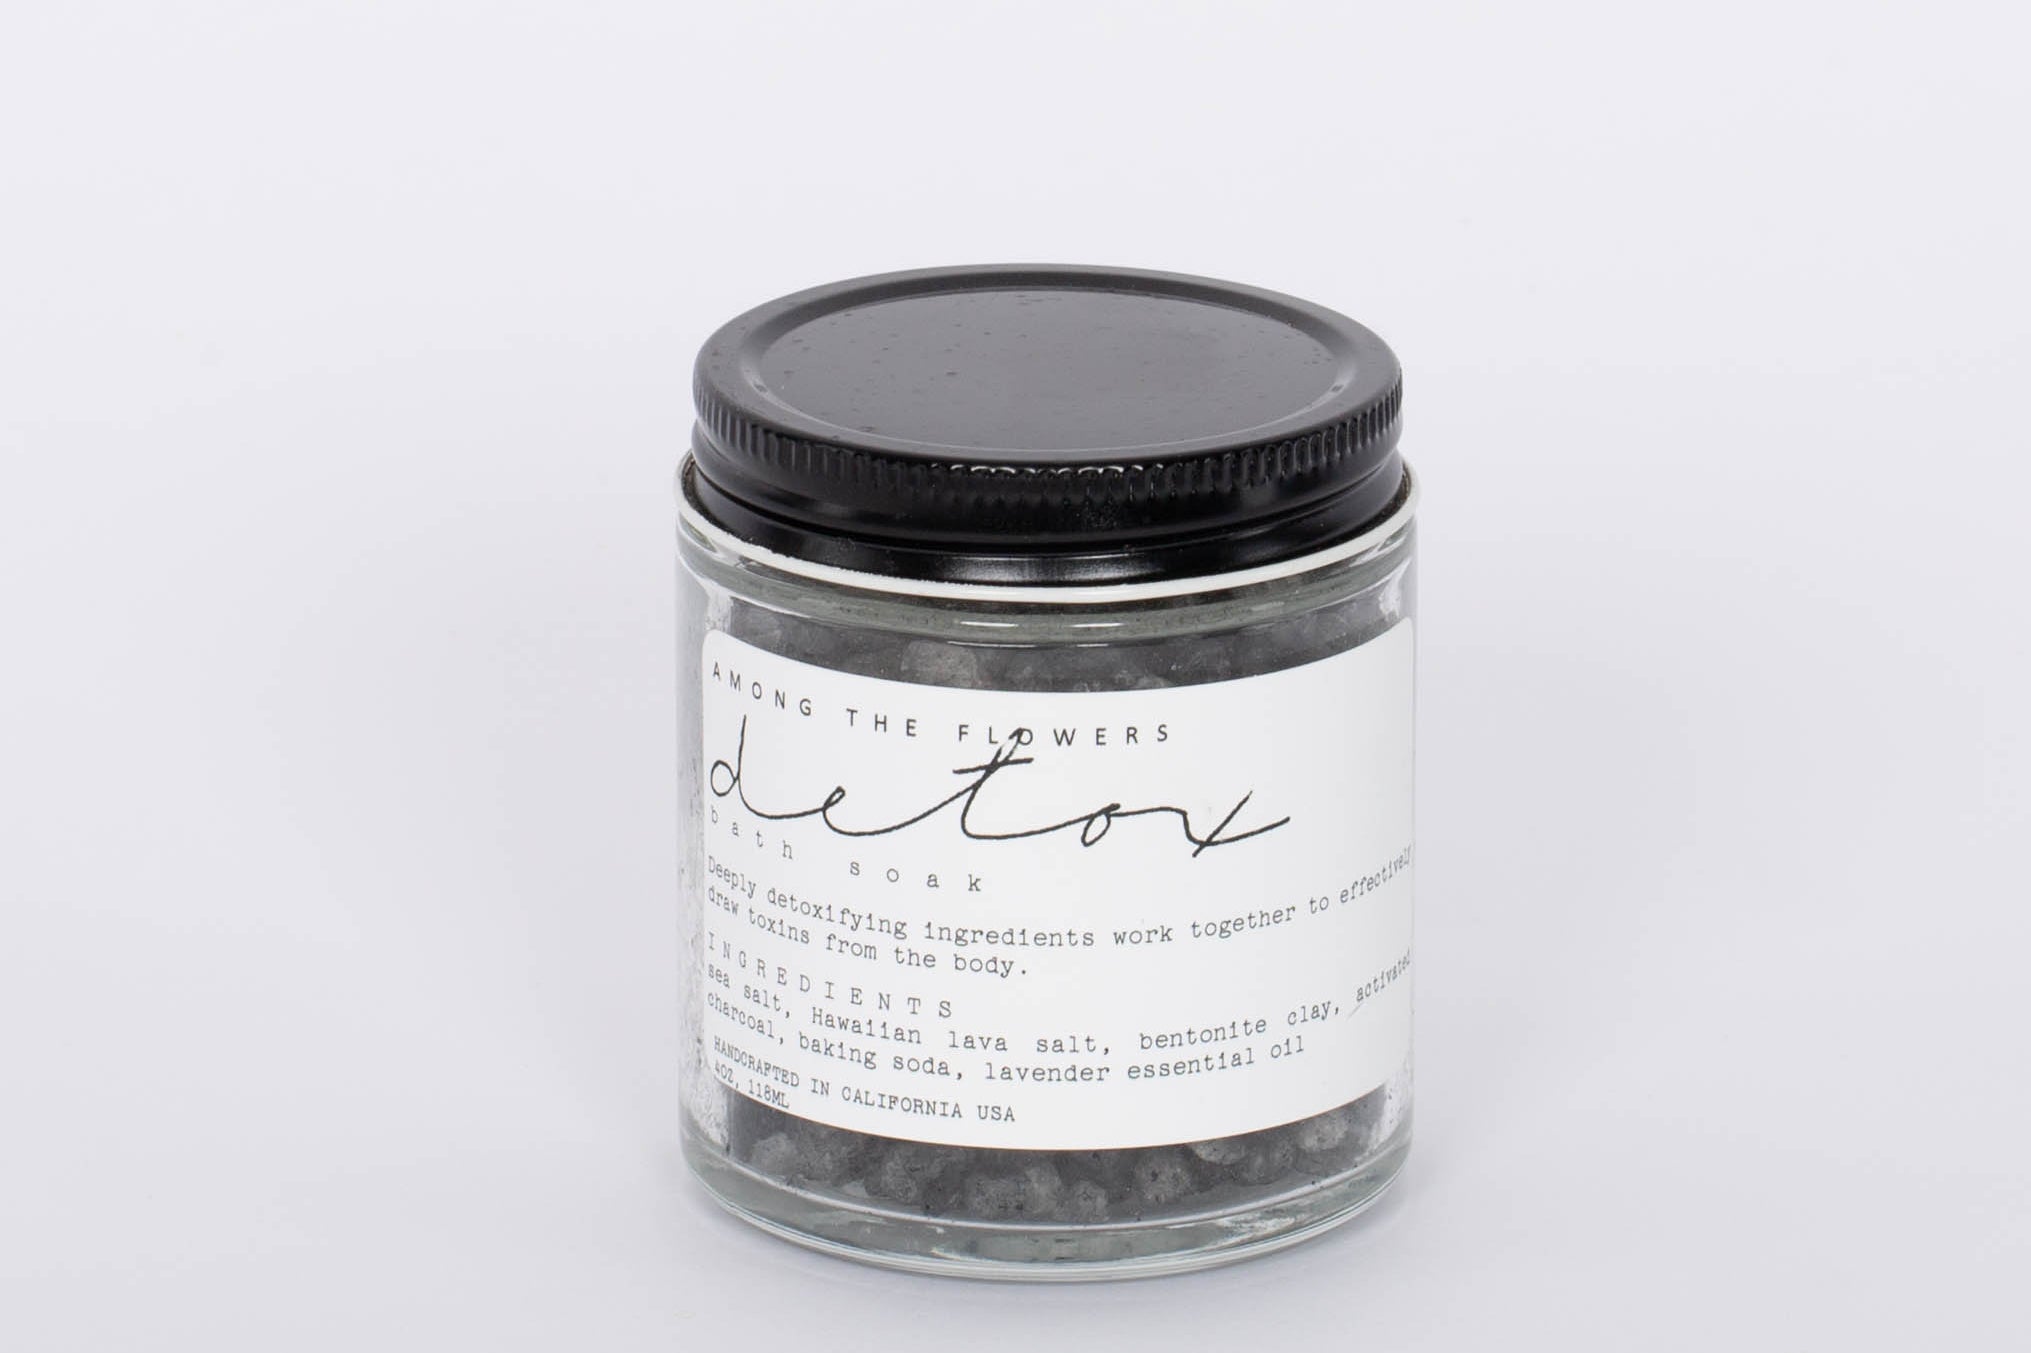 Among the Flowers Detox Bath Soak. D E T O X  A select blend of effective detoxifying agents presents a premium bath for those seeking to cleanse the body from exposure to pollutants. Whether it is diet, environmental, or other toxic exposure, a detoxifying bath with activated charcoal can draw impurities out through its negative charge. 